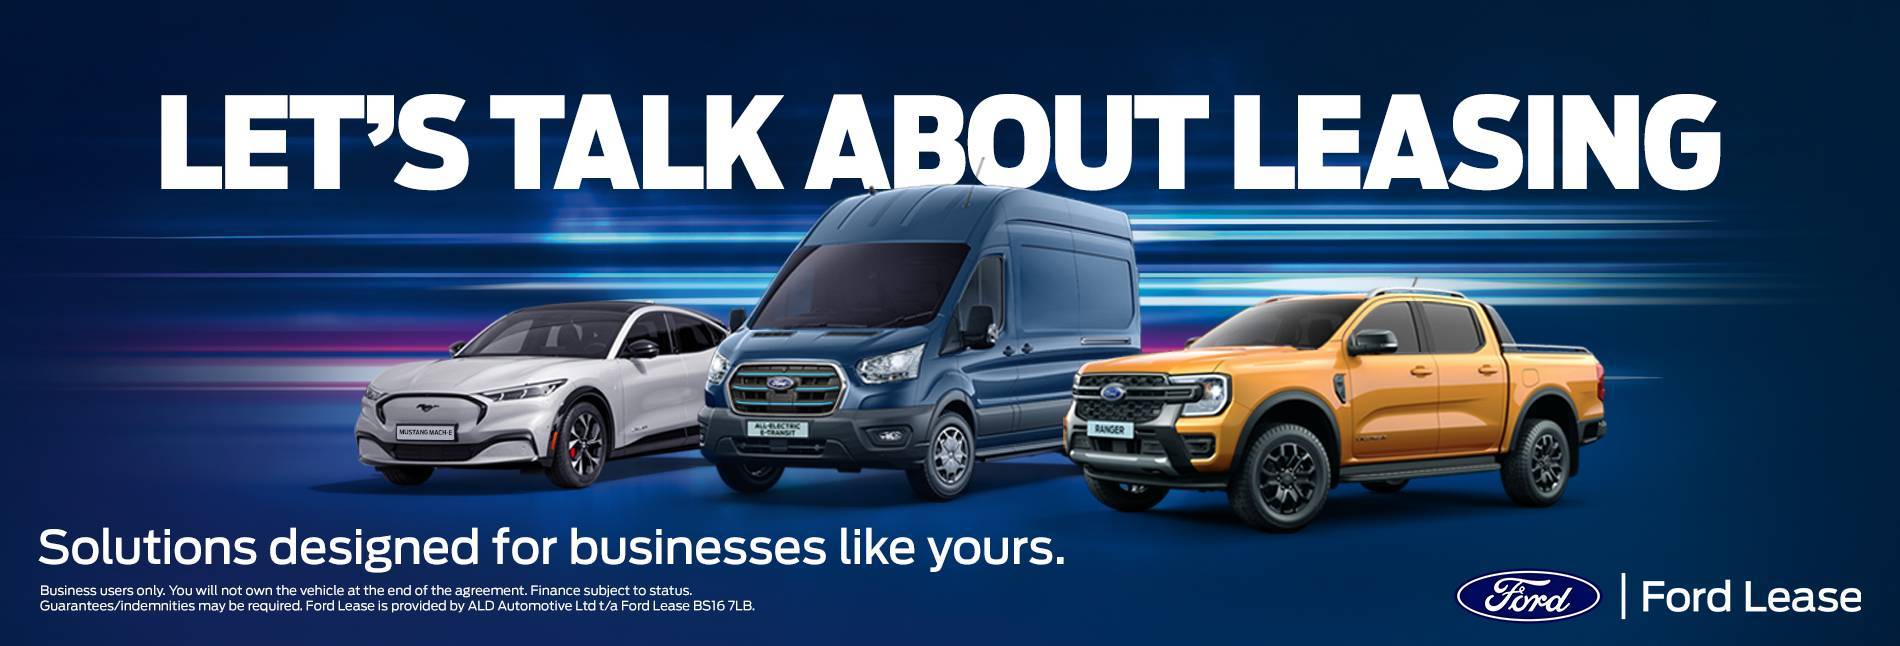 Let's talk ford leasing